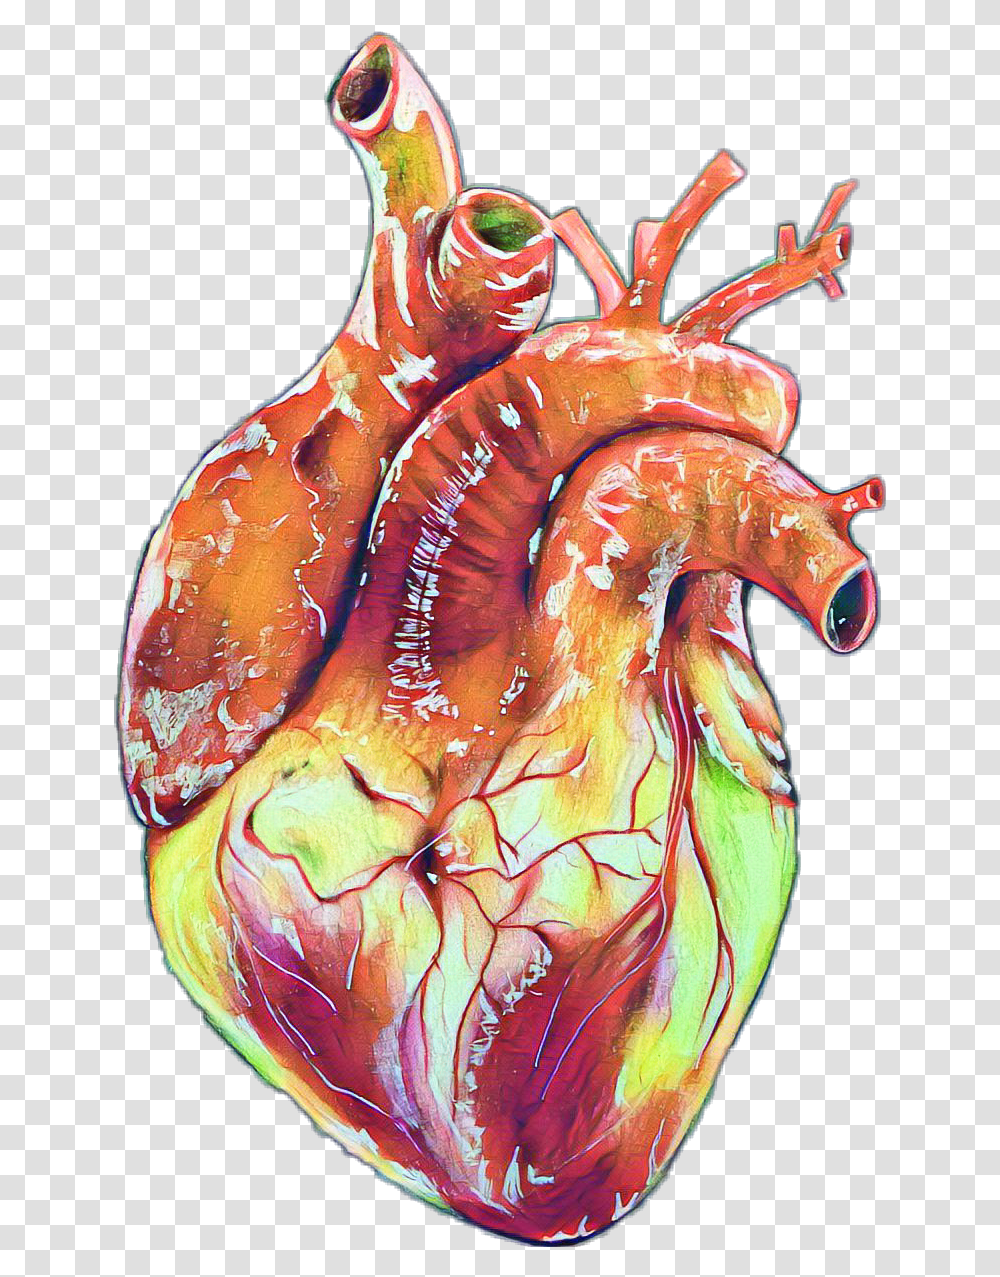 Human Heart Realistic Drawings Human Heart Drawing Realistic, Lobster, Seafood, Sea Life, Animal Transparent Png